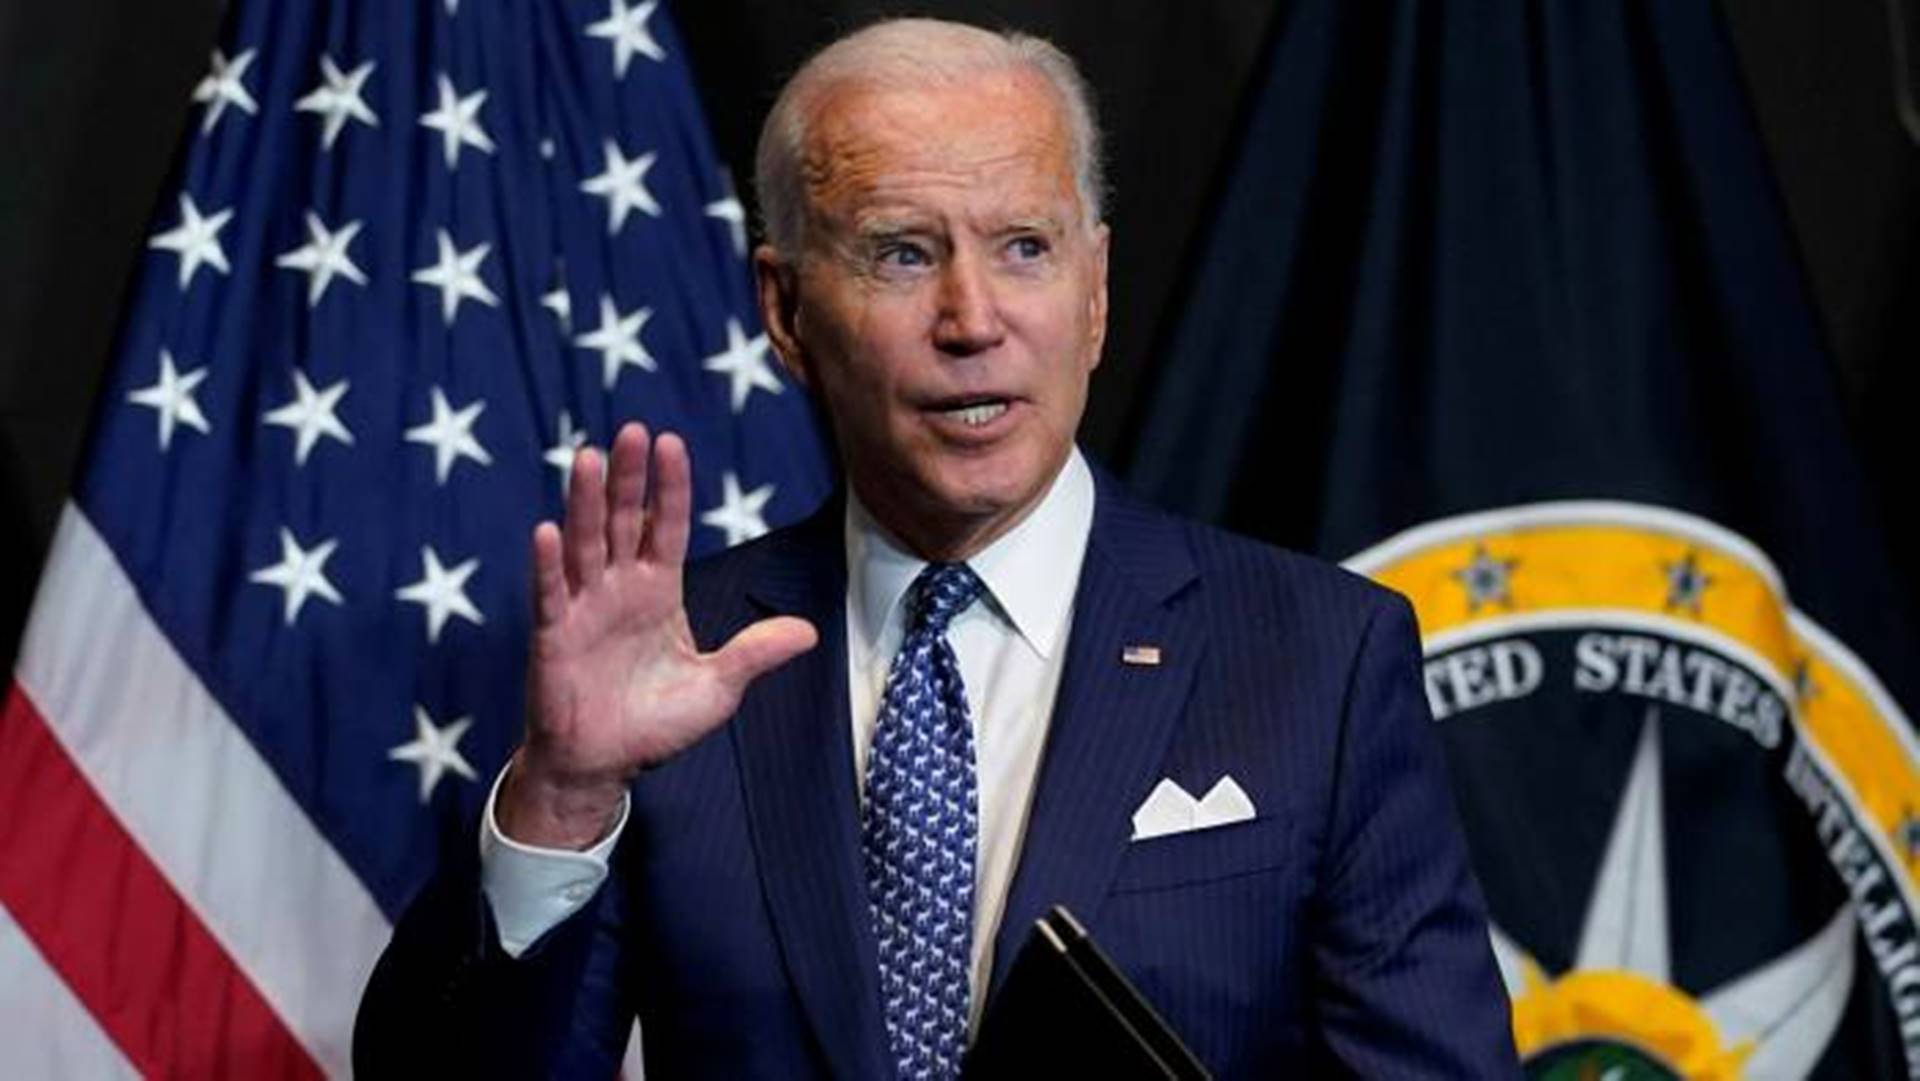 Biden says his administration will do ‘whatever is needed’ to help states reeling from tornadoes